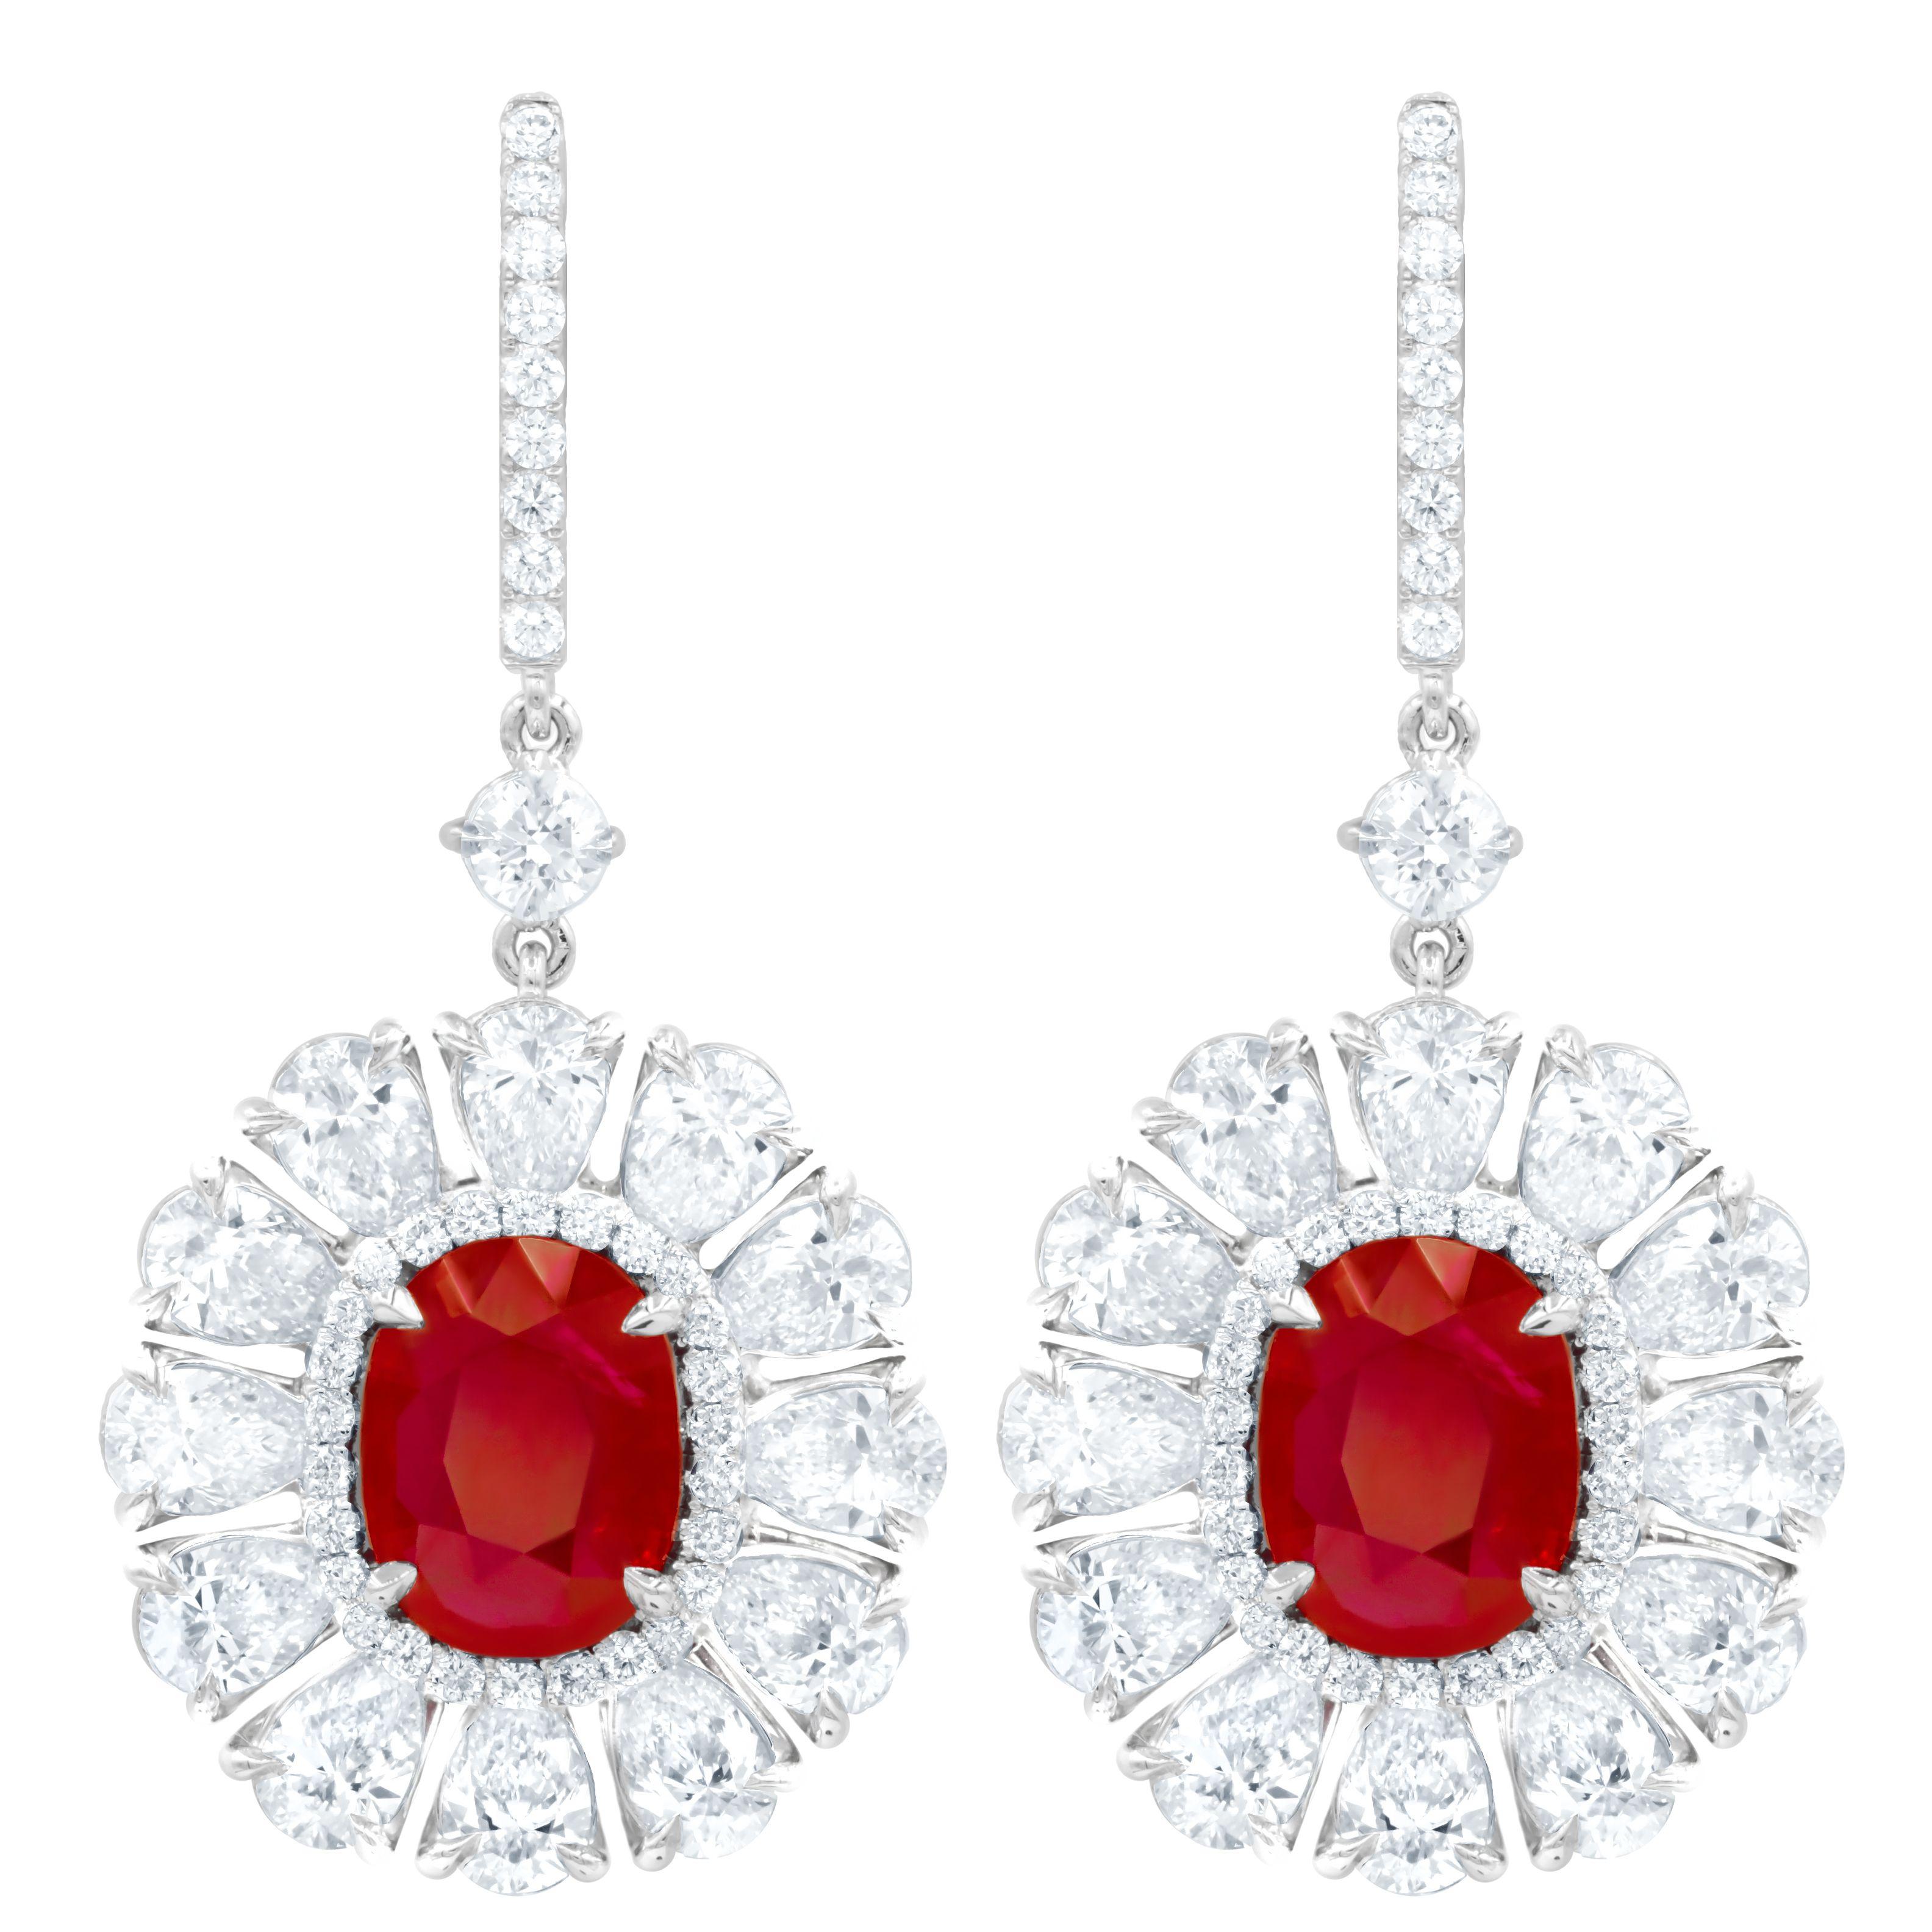 Diana M. 6.69 Carat Ruby Set in Diamond Halo Flower Shaped Earrings In New Condition For Sale In New York, NY